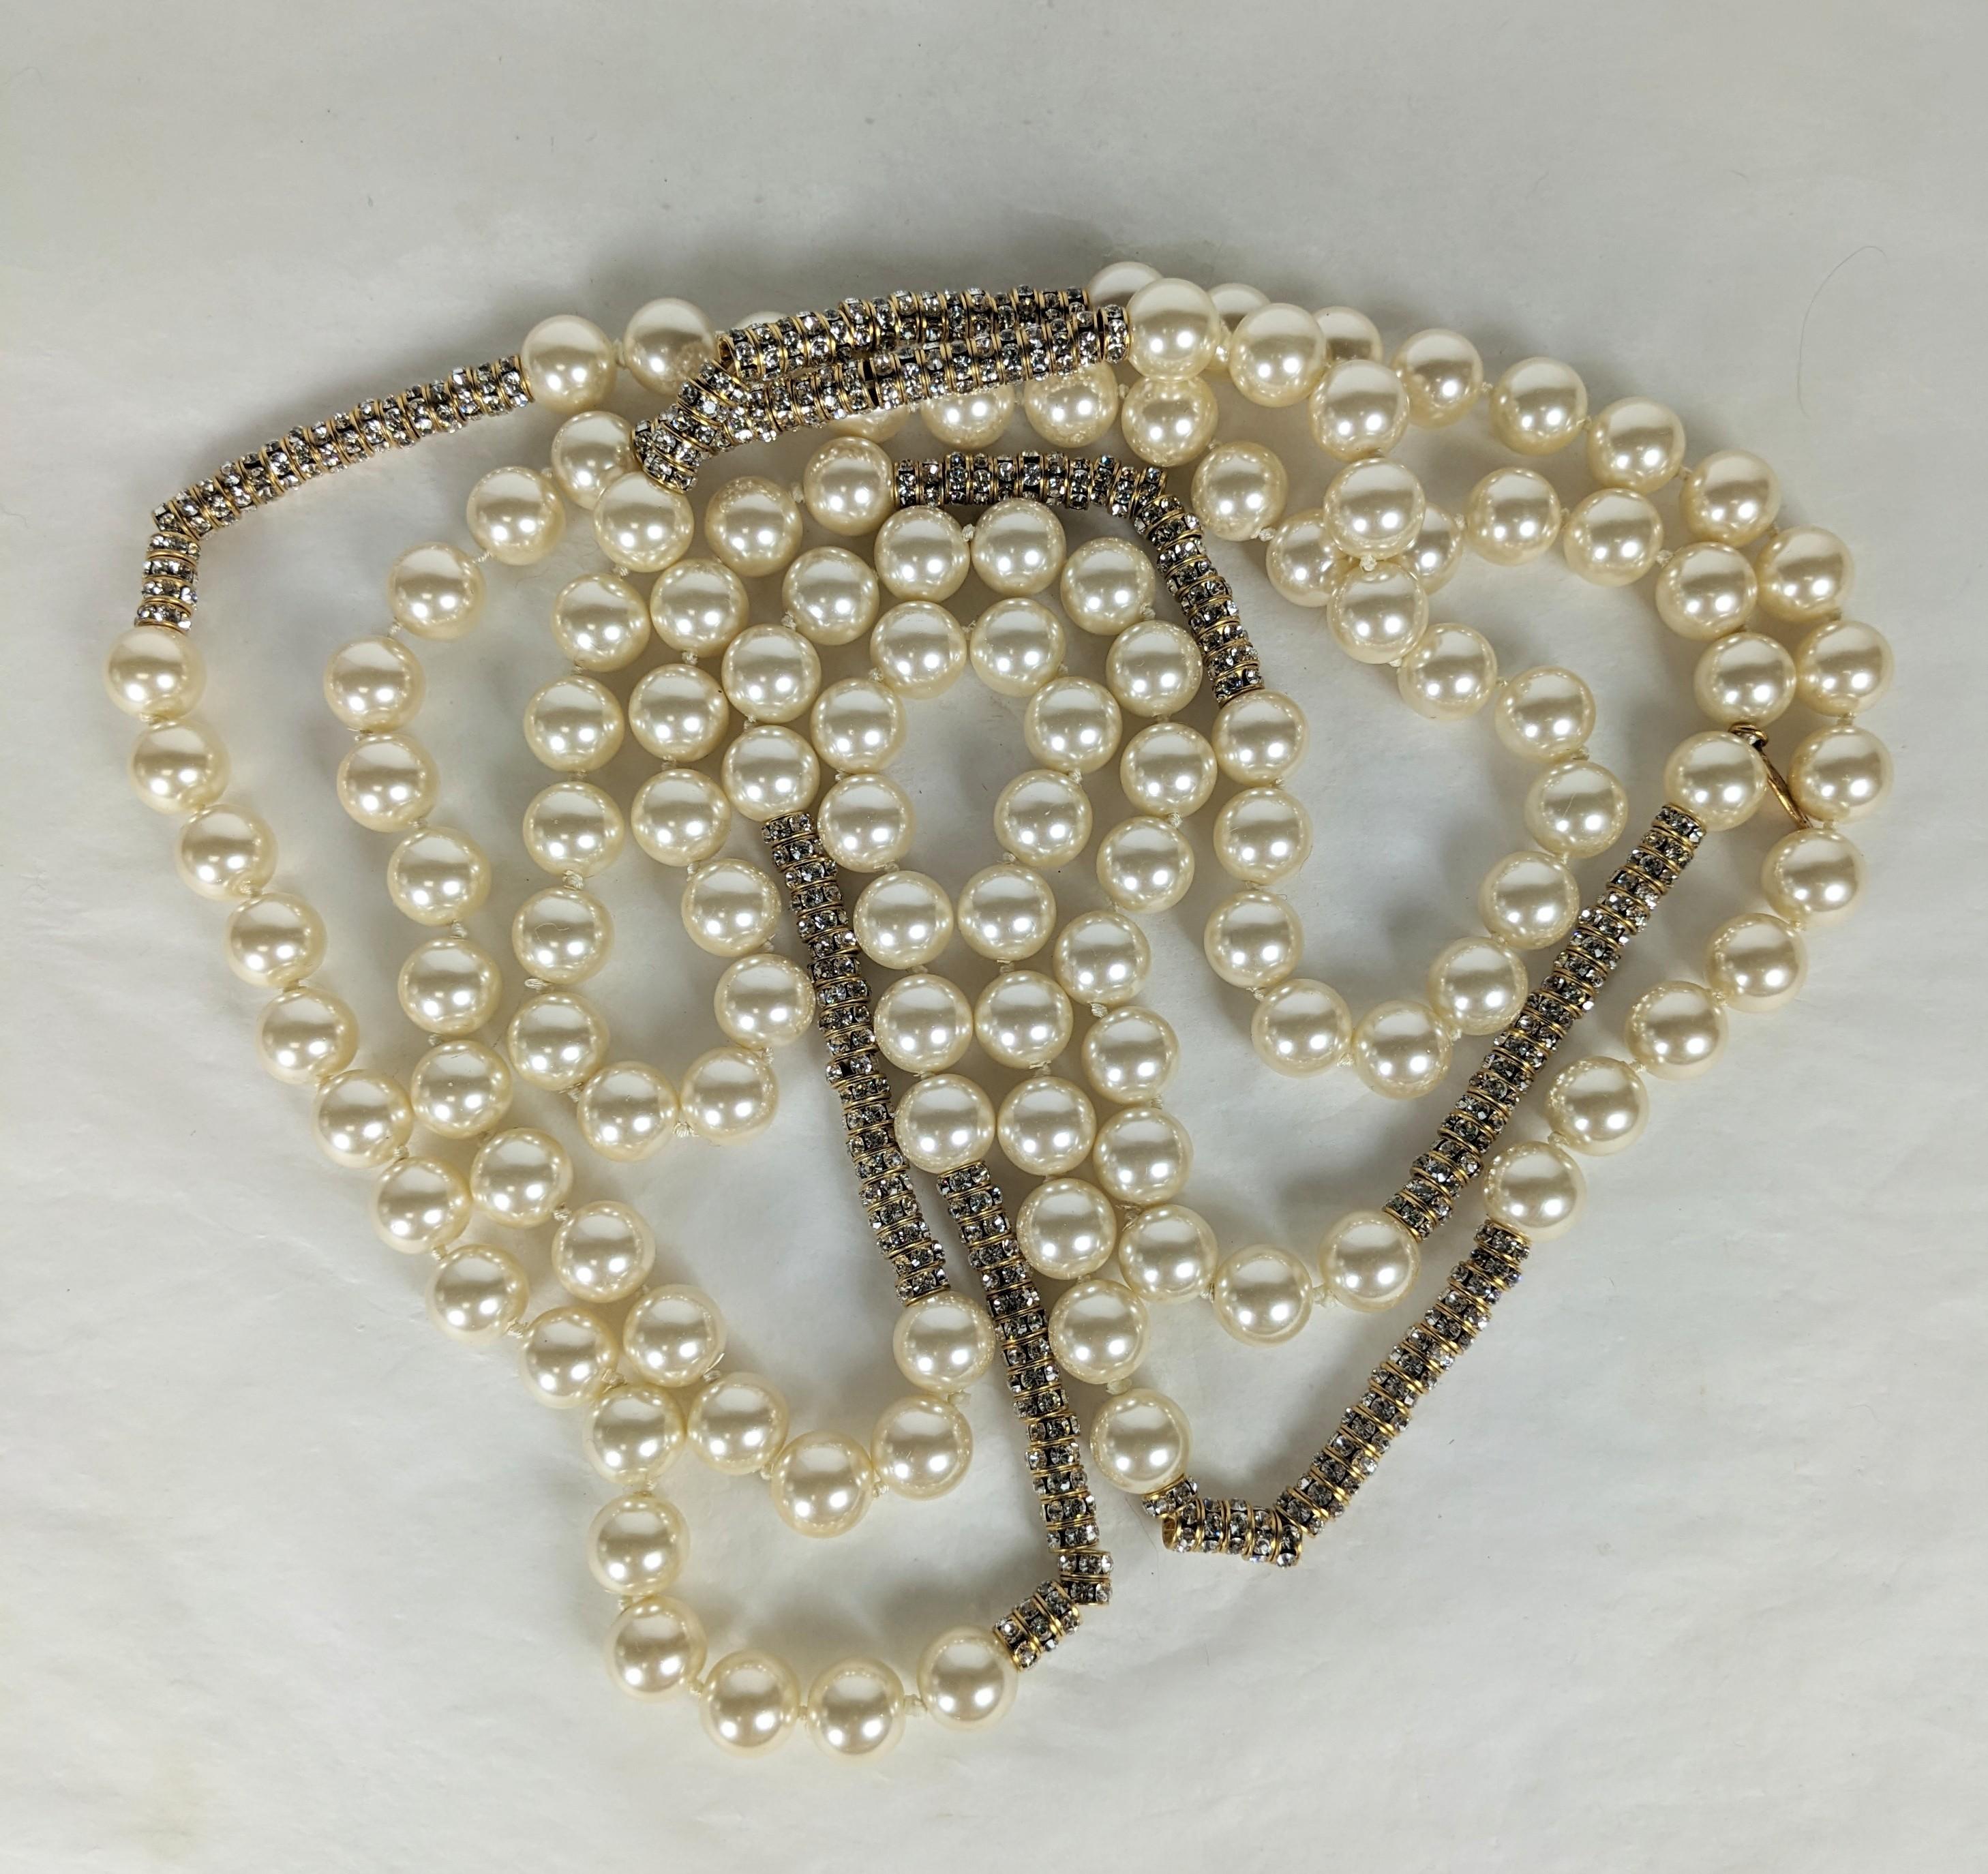 Rare Chanel Endless Pearl and Crystal Rondel Necklace In Excellent Condition For Sale In New York, NY